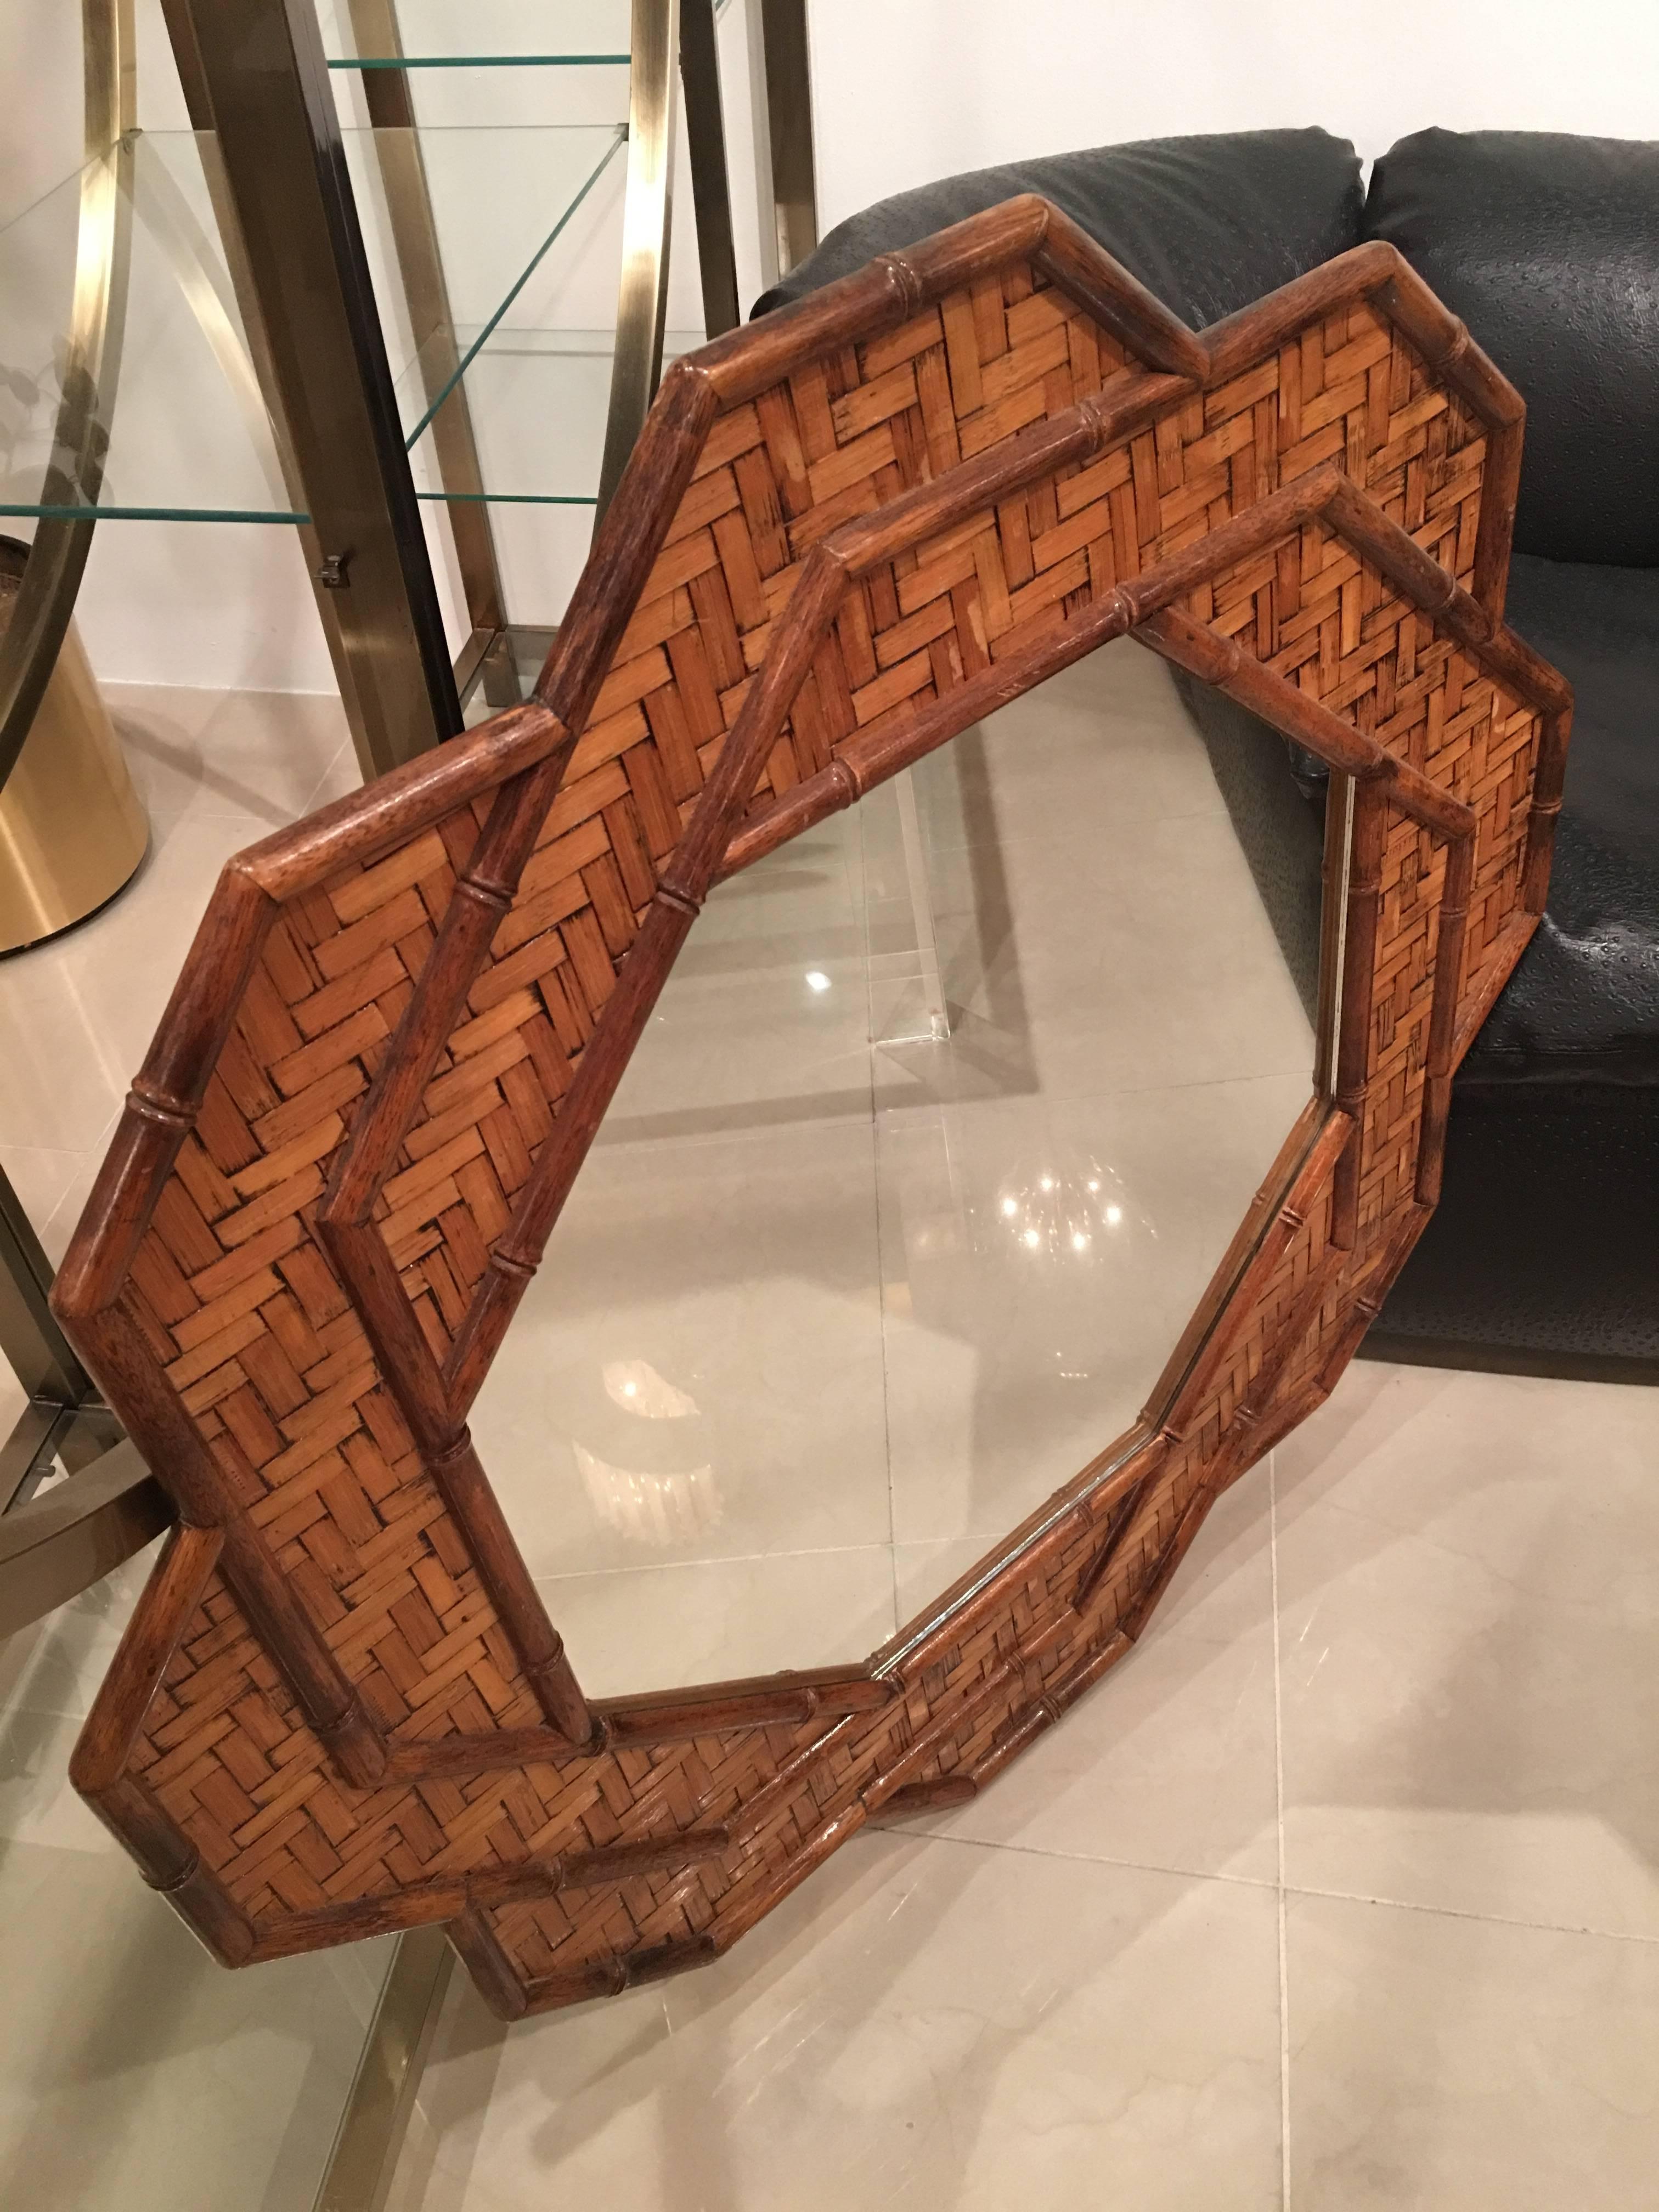 Beautiful vintage Hollywood Regency octagonal wall mirror. Woven rattan, bamboo, pencil reed, wicker tropical Palm Beach mirror. Comes ready to hang.